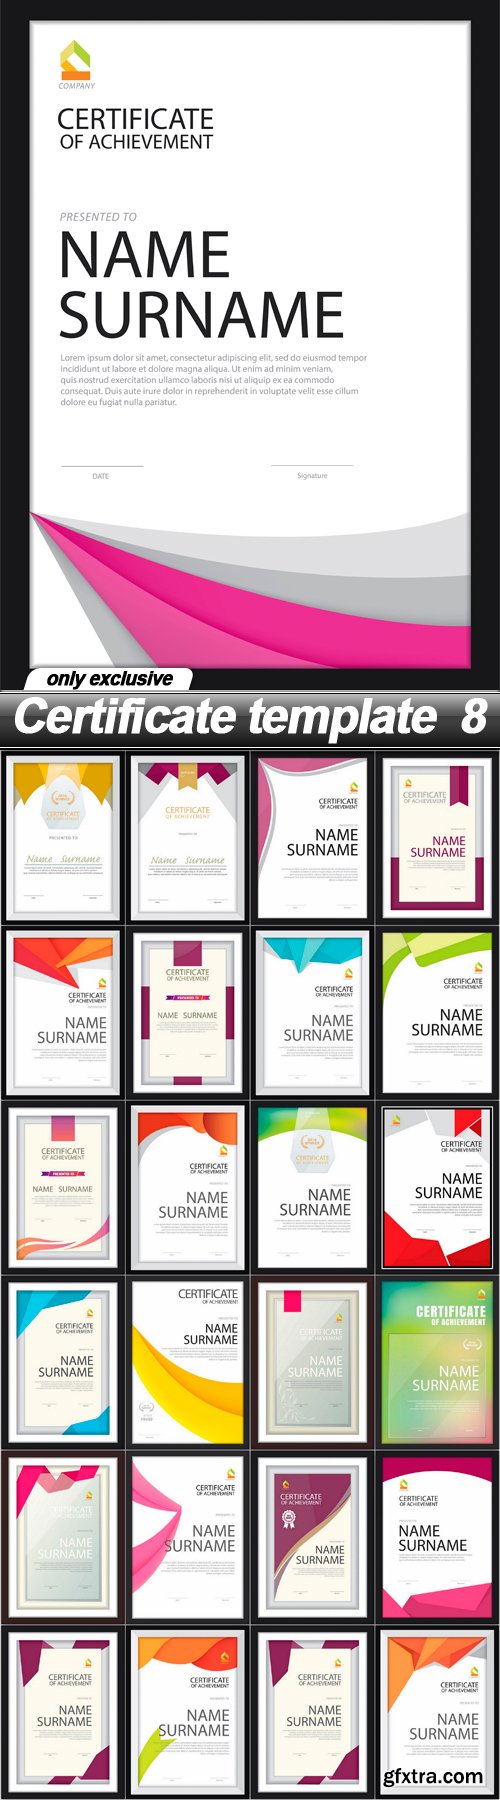 Certificate template 8 - 25 EPS